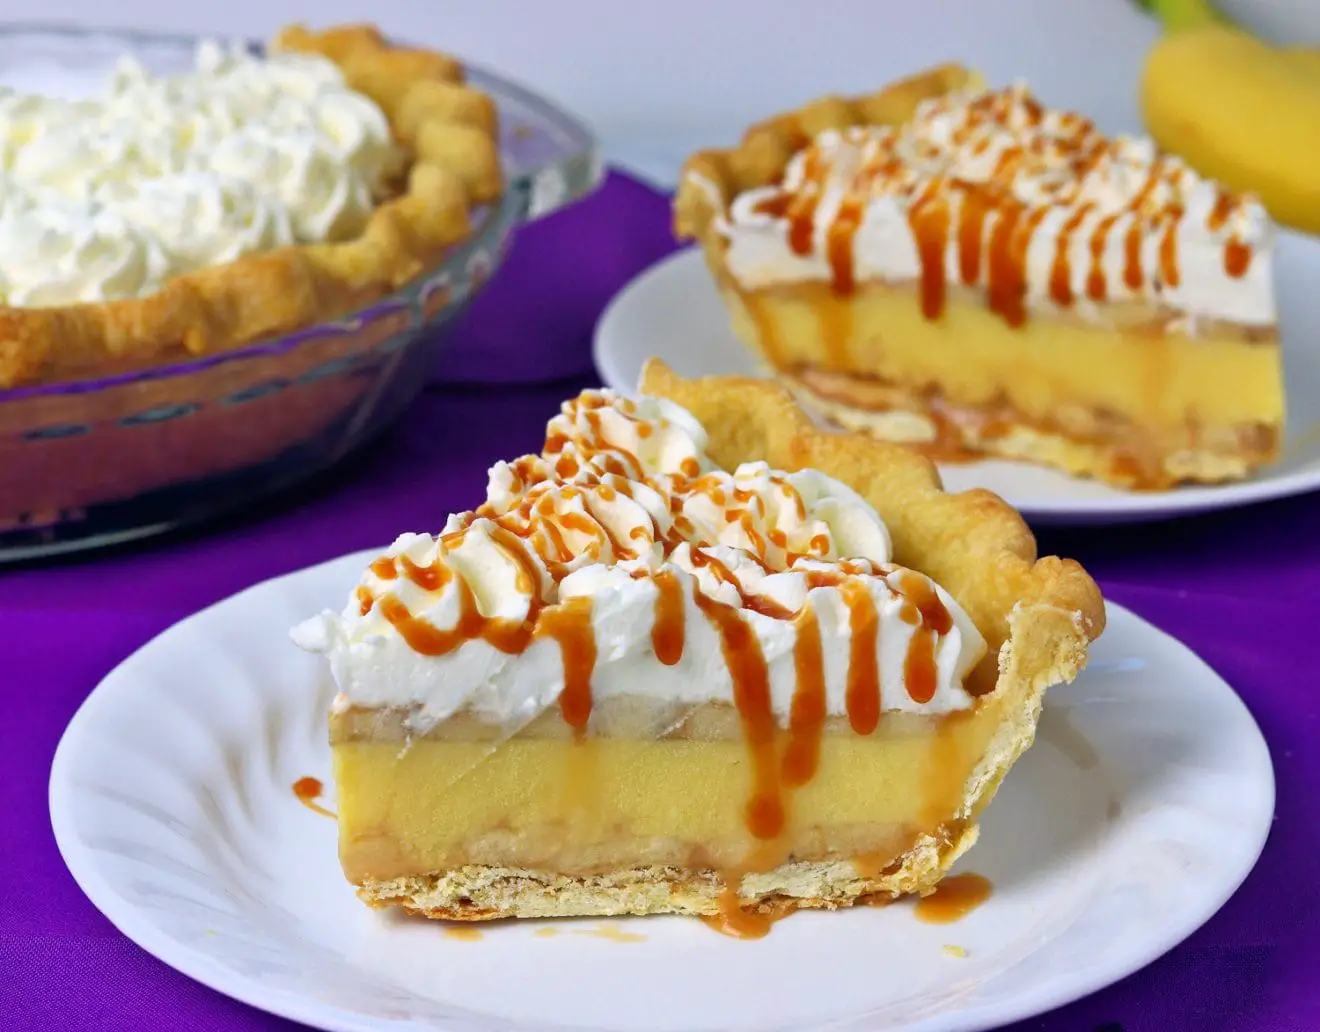 Banana Cream Pie with Salted Caramel Sauce - Meals by Molly